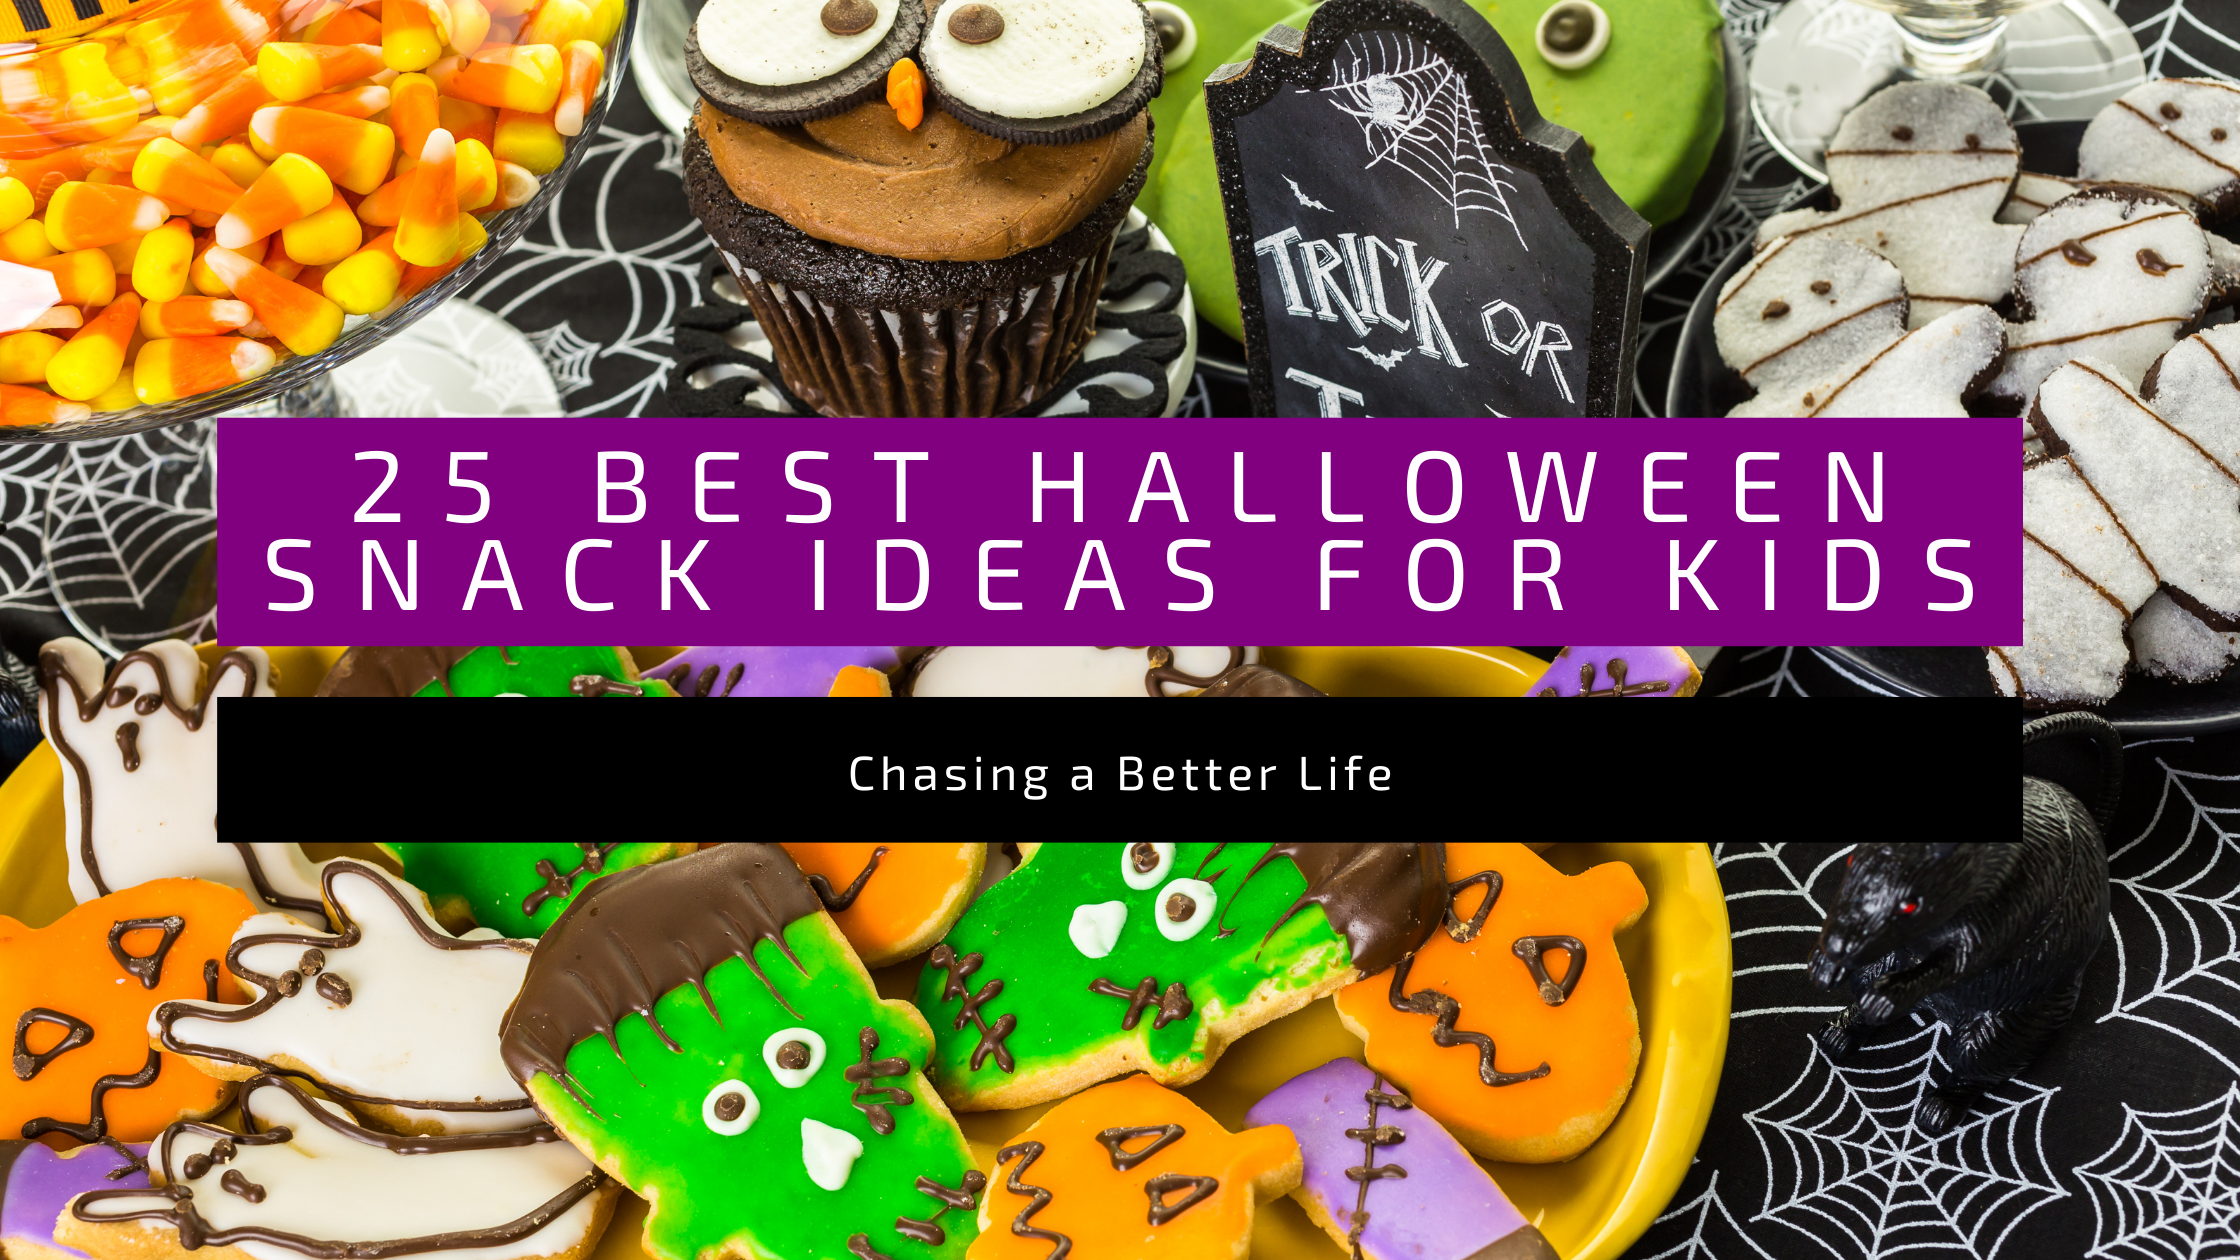 The 25 Best Halloween Snack Ideas for Kids 46